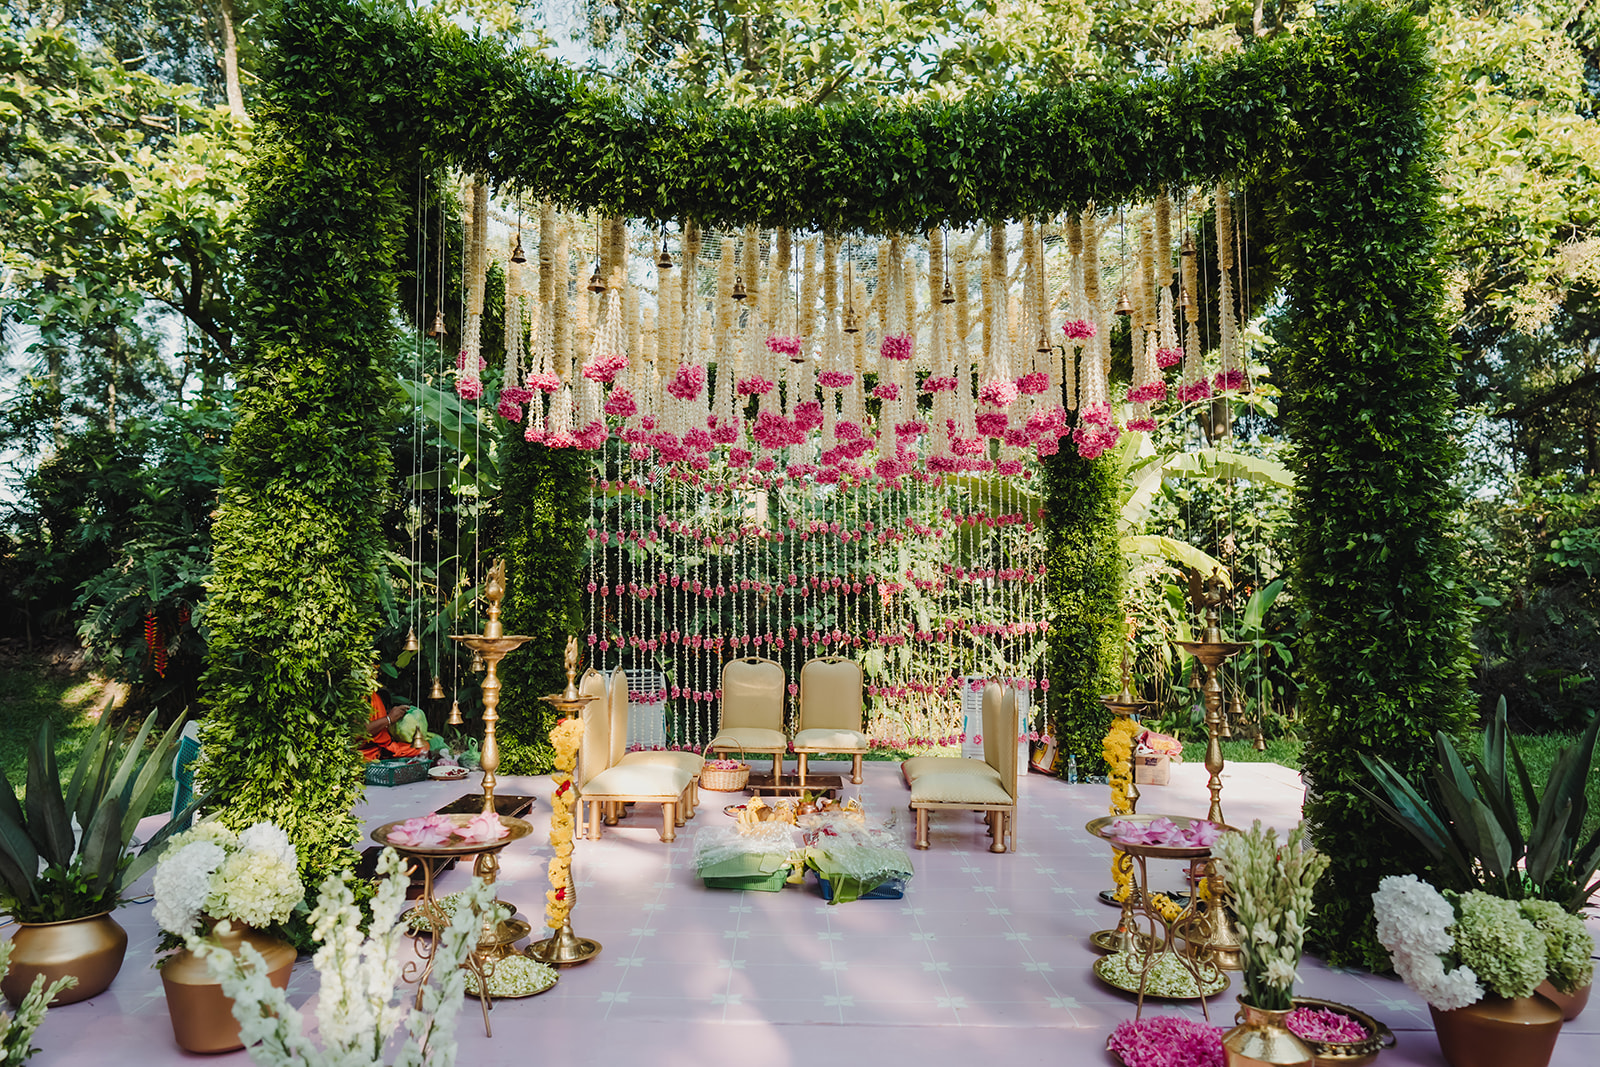 Exquisite mandap decor: A picture-perfect setting with breathtaking design elements.